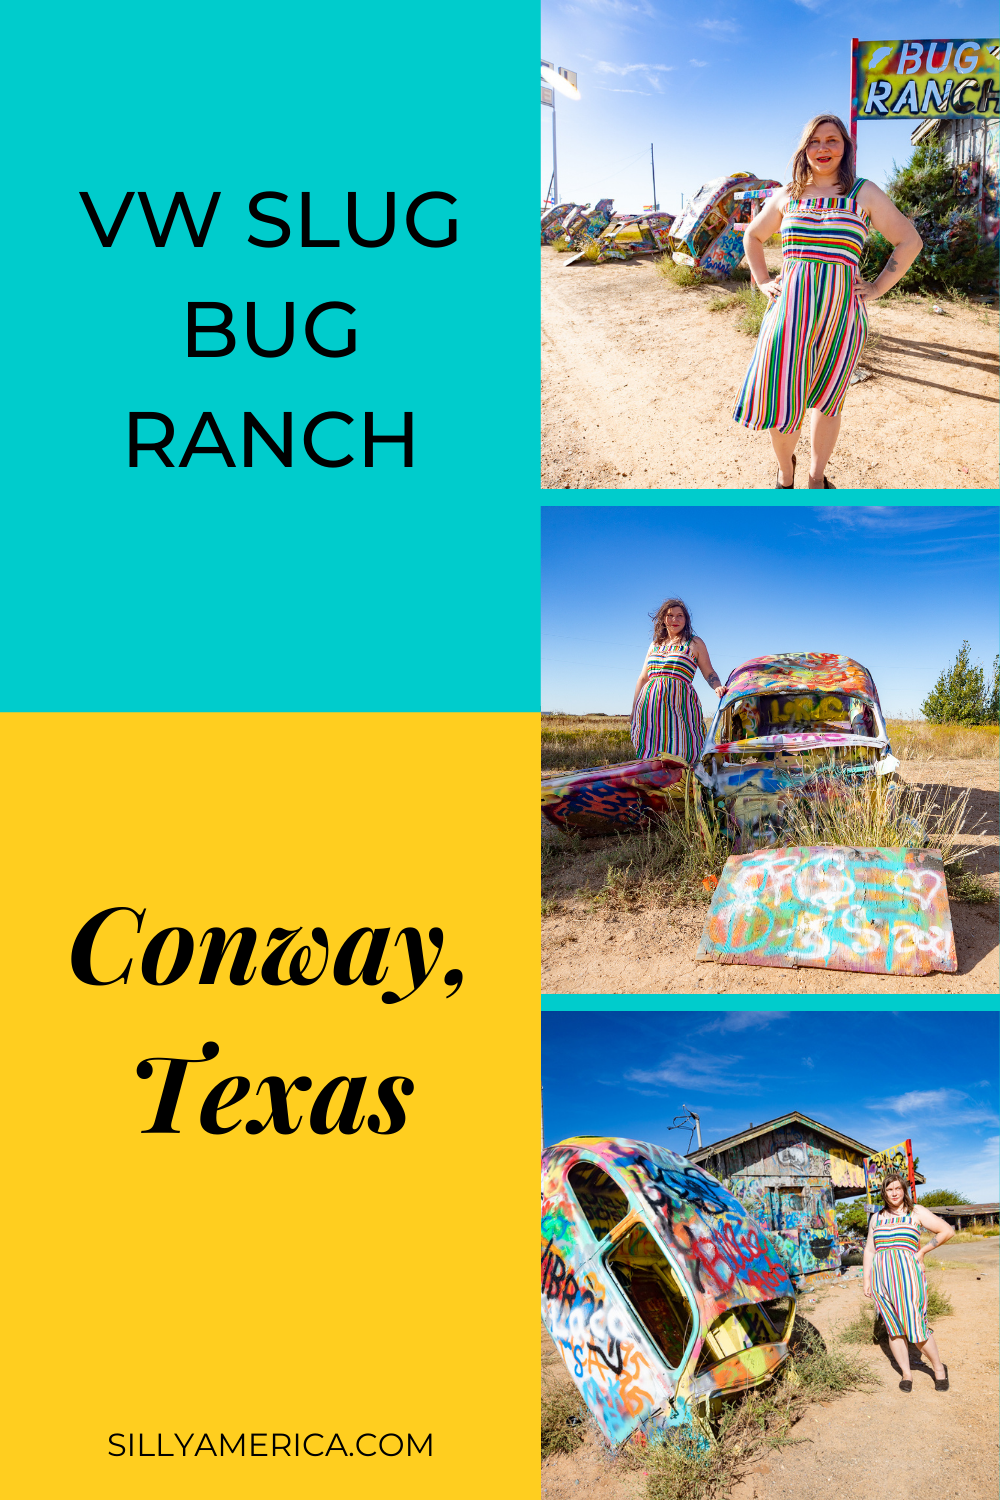 Do you ever play slug bug on long road trips? If so, you might want to protect your arm now. VW Slug Bug Ranch in Conway, Texas is a Route 66 roadside attraction that features several of those elusive bug shaped cars buried nose deep in a row. Add this Texas roadside attraction to your Route 66 itinerary. #RoadTrips #RoadTripStop #Route66 #Route66RoadTrip #TexasRoute66 #Texas #TexasRoadTrip #TexasRoadsideAttractions #RoadsideAttractions #RoadsideAttraction #RoadsideAmerica #RoadTrip 